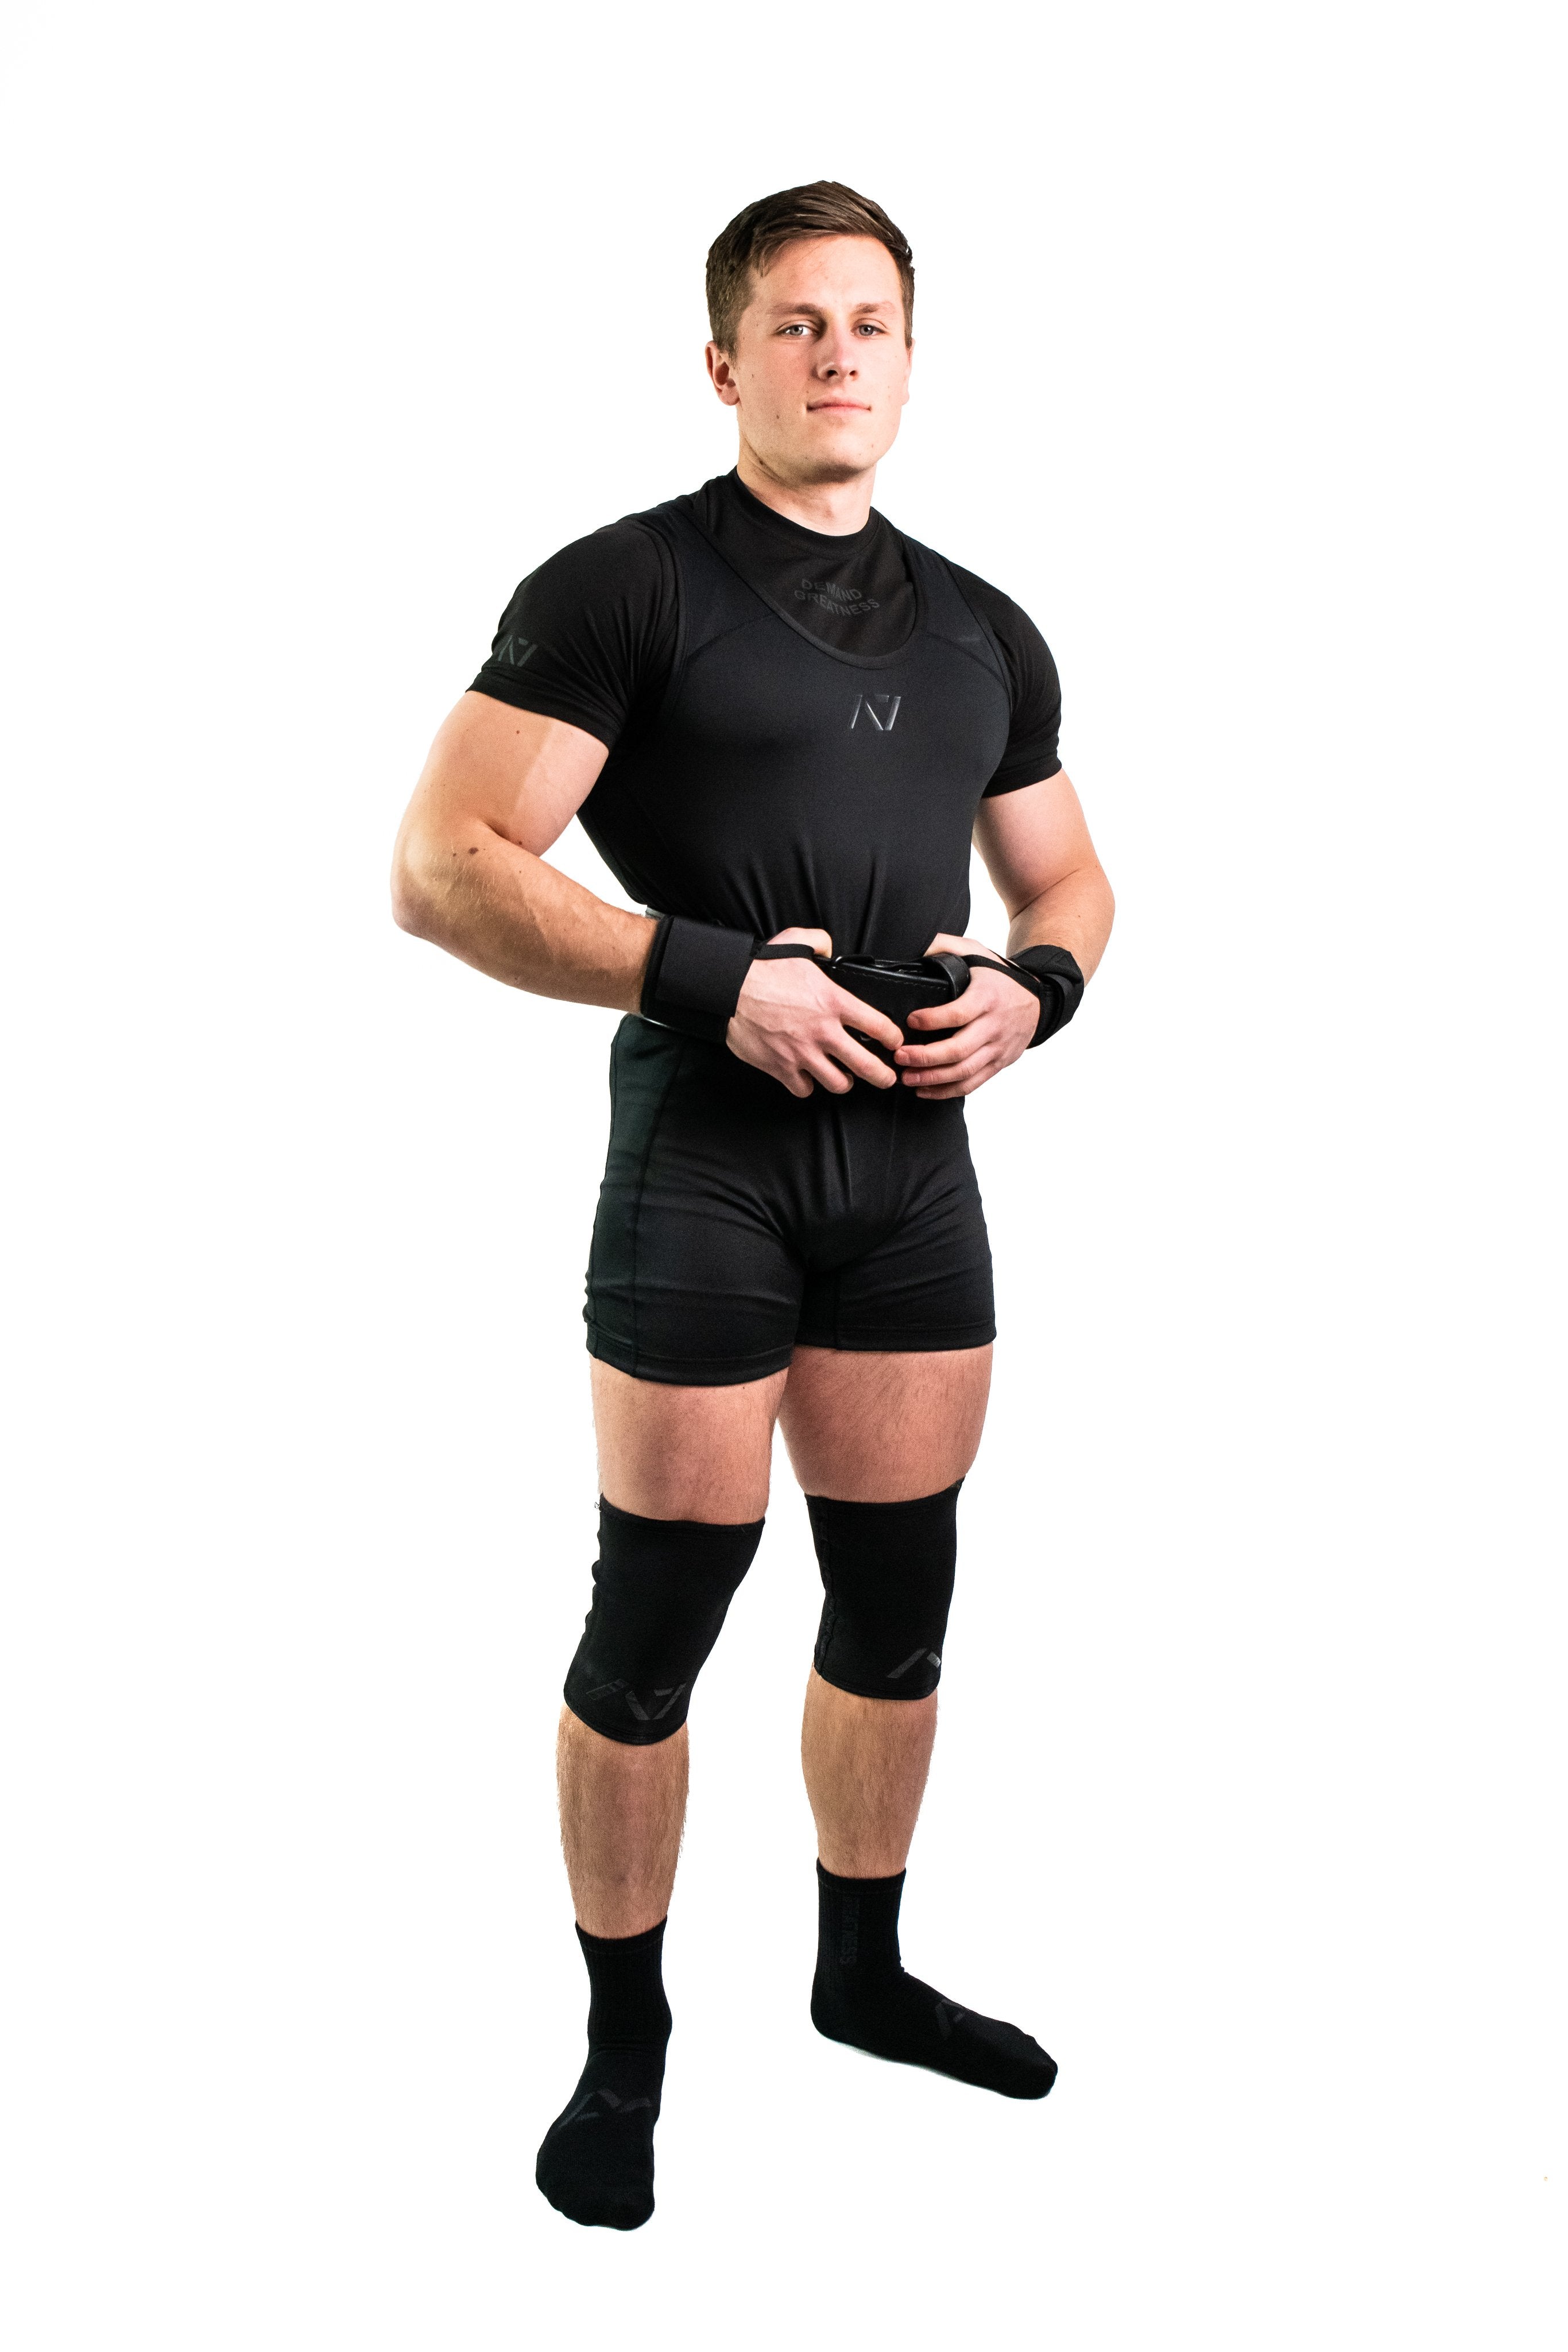 Hourglass Knee Sleeves - Stealth - A7